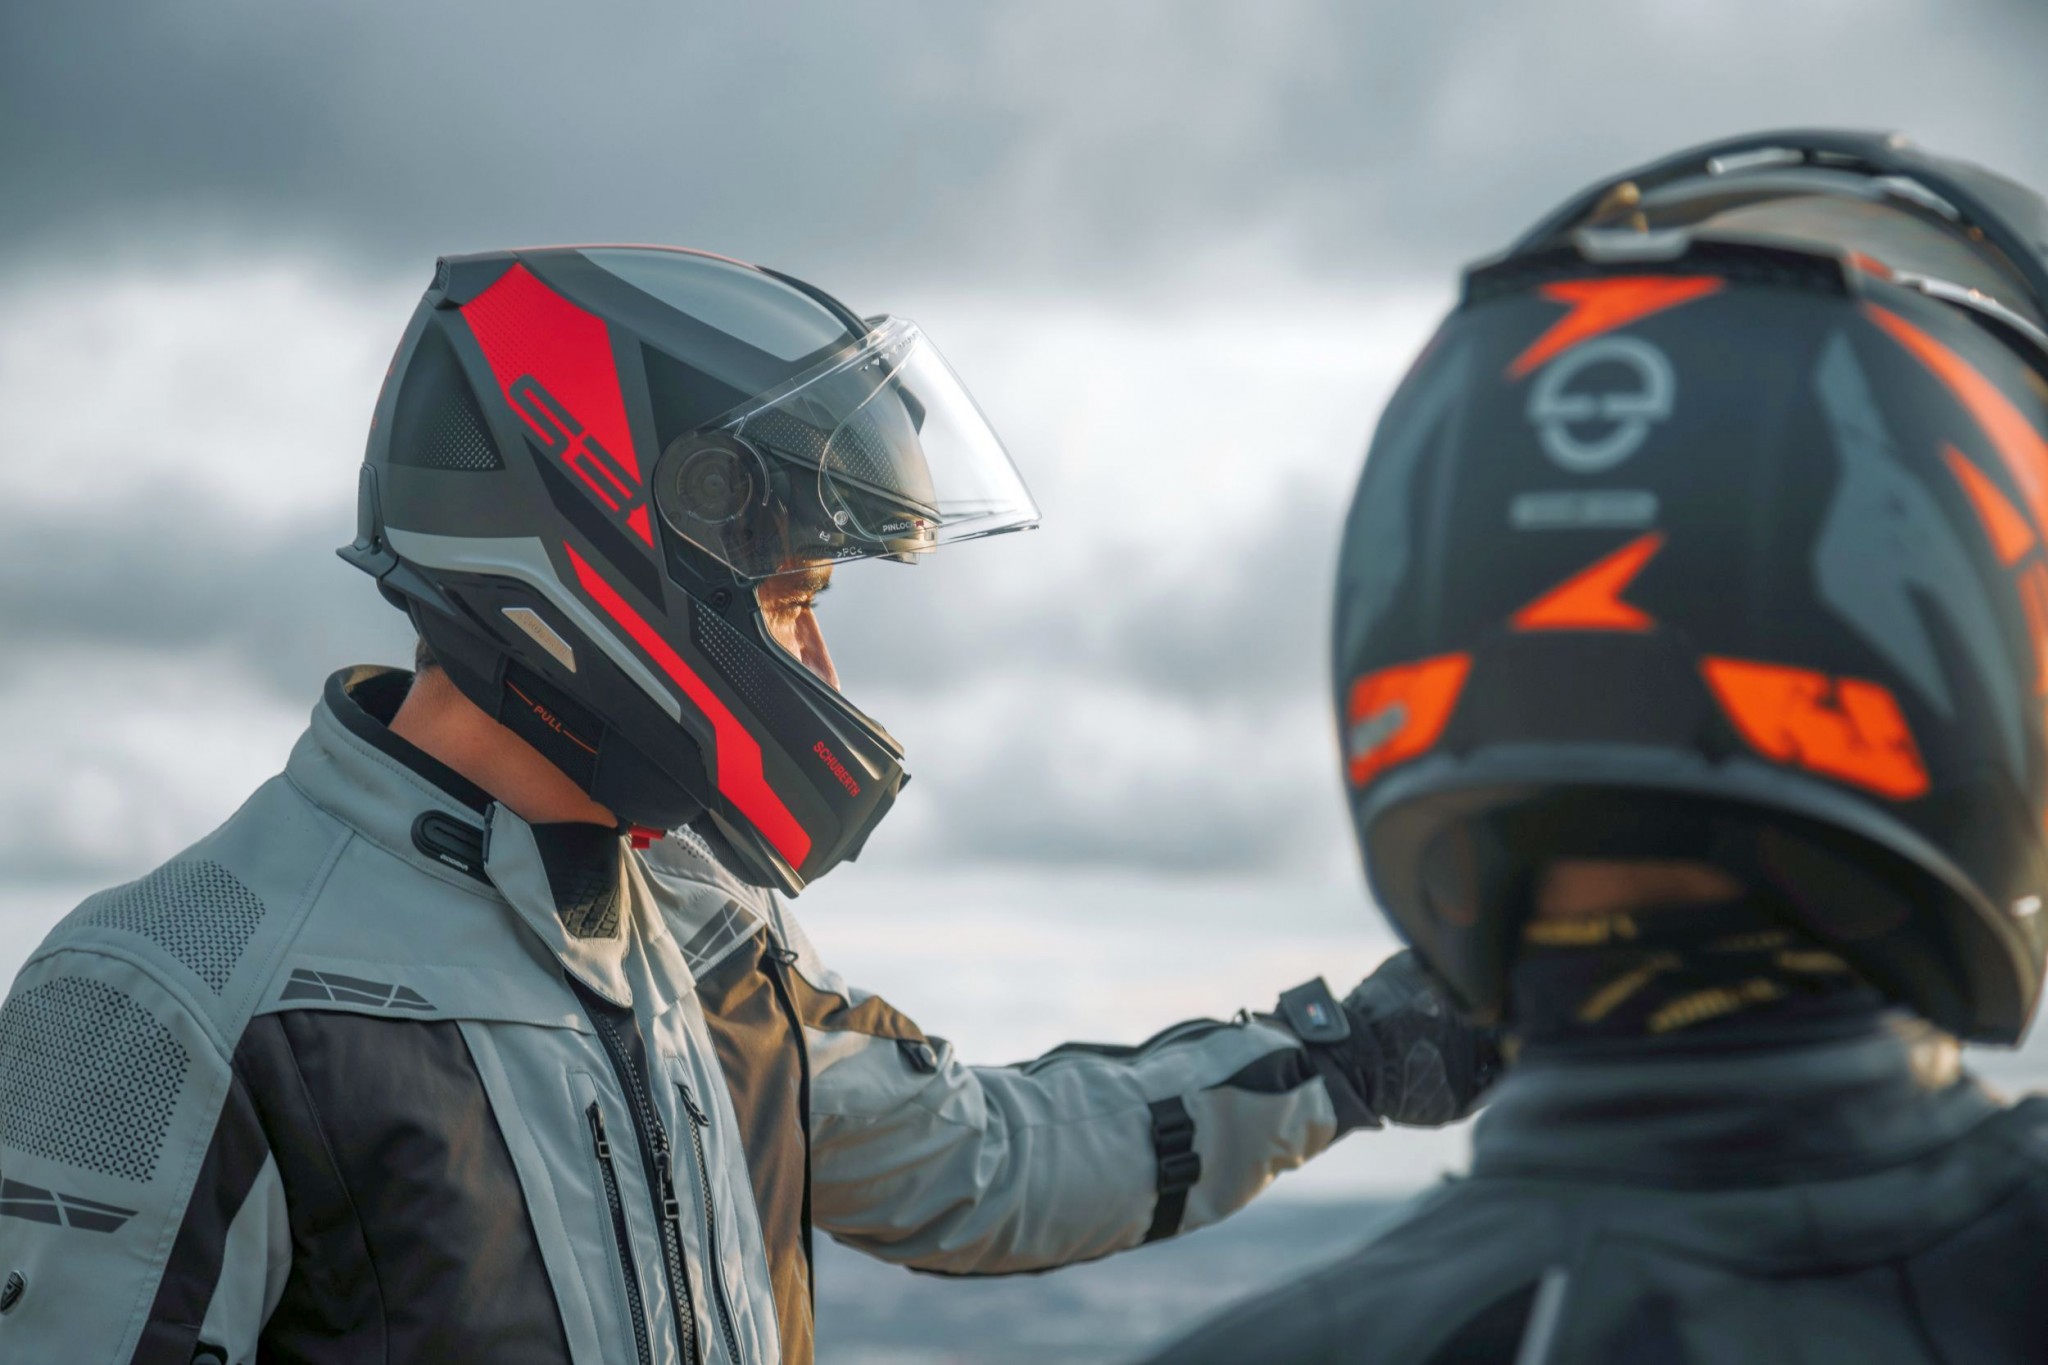 Schuberth S3 sport touring helmet in the test - Image 43